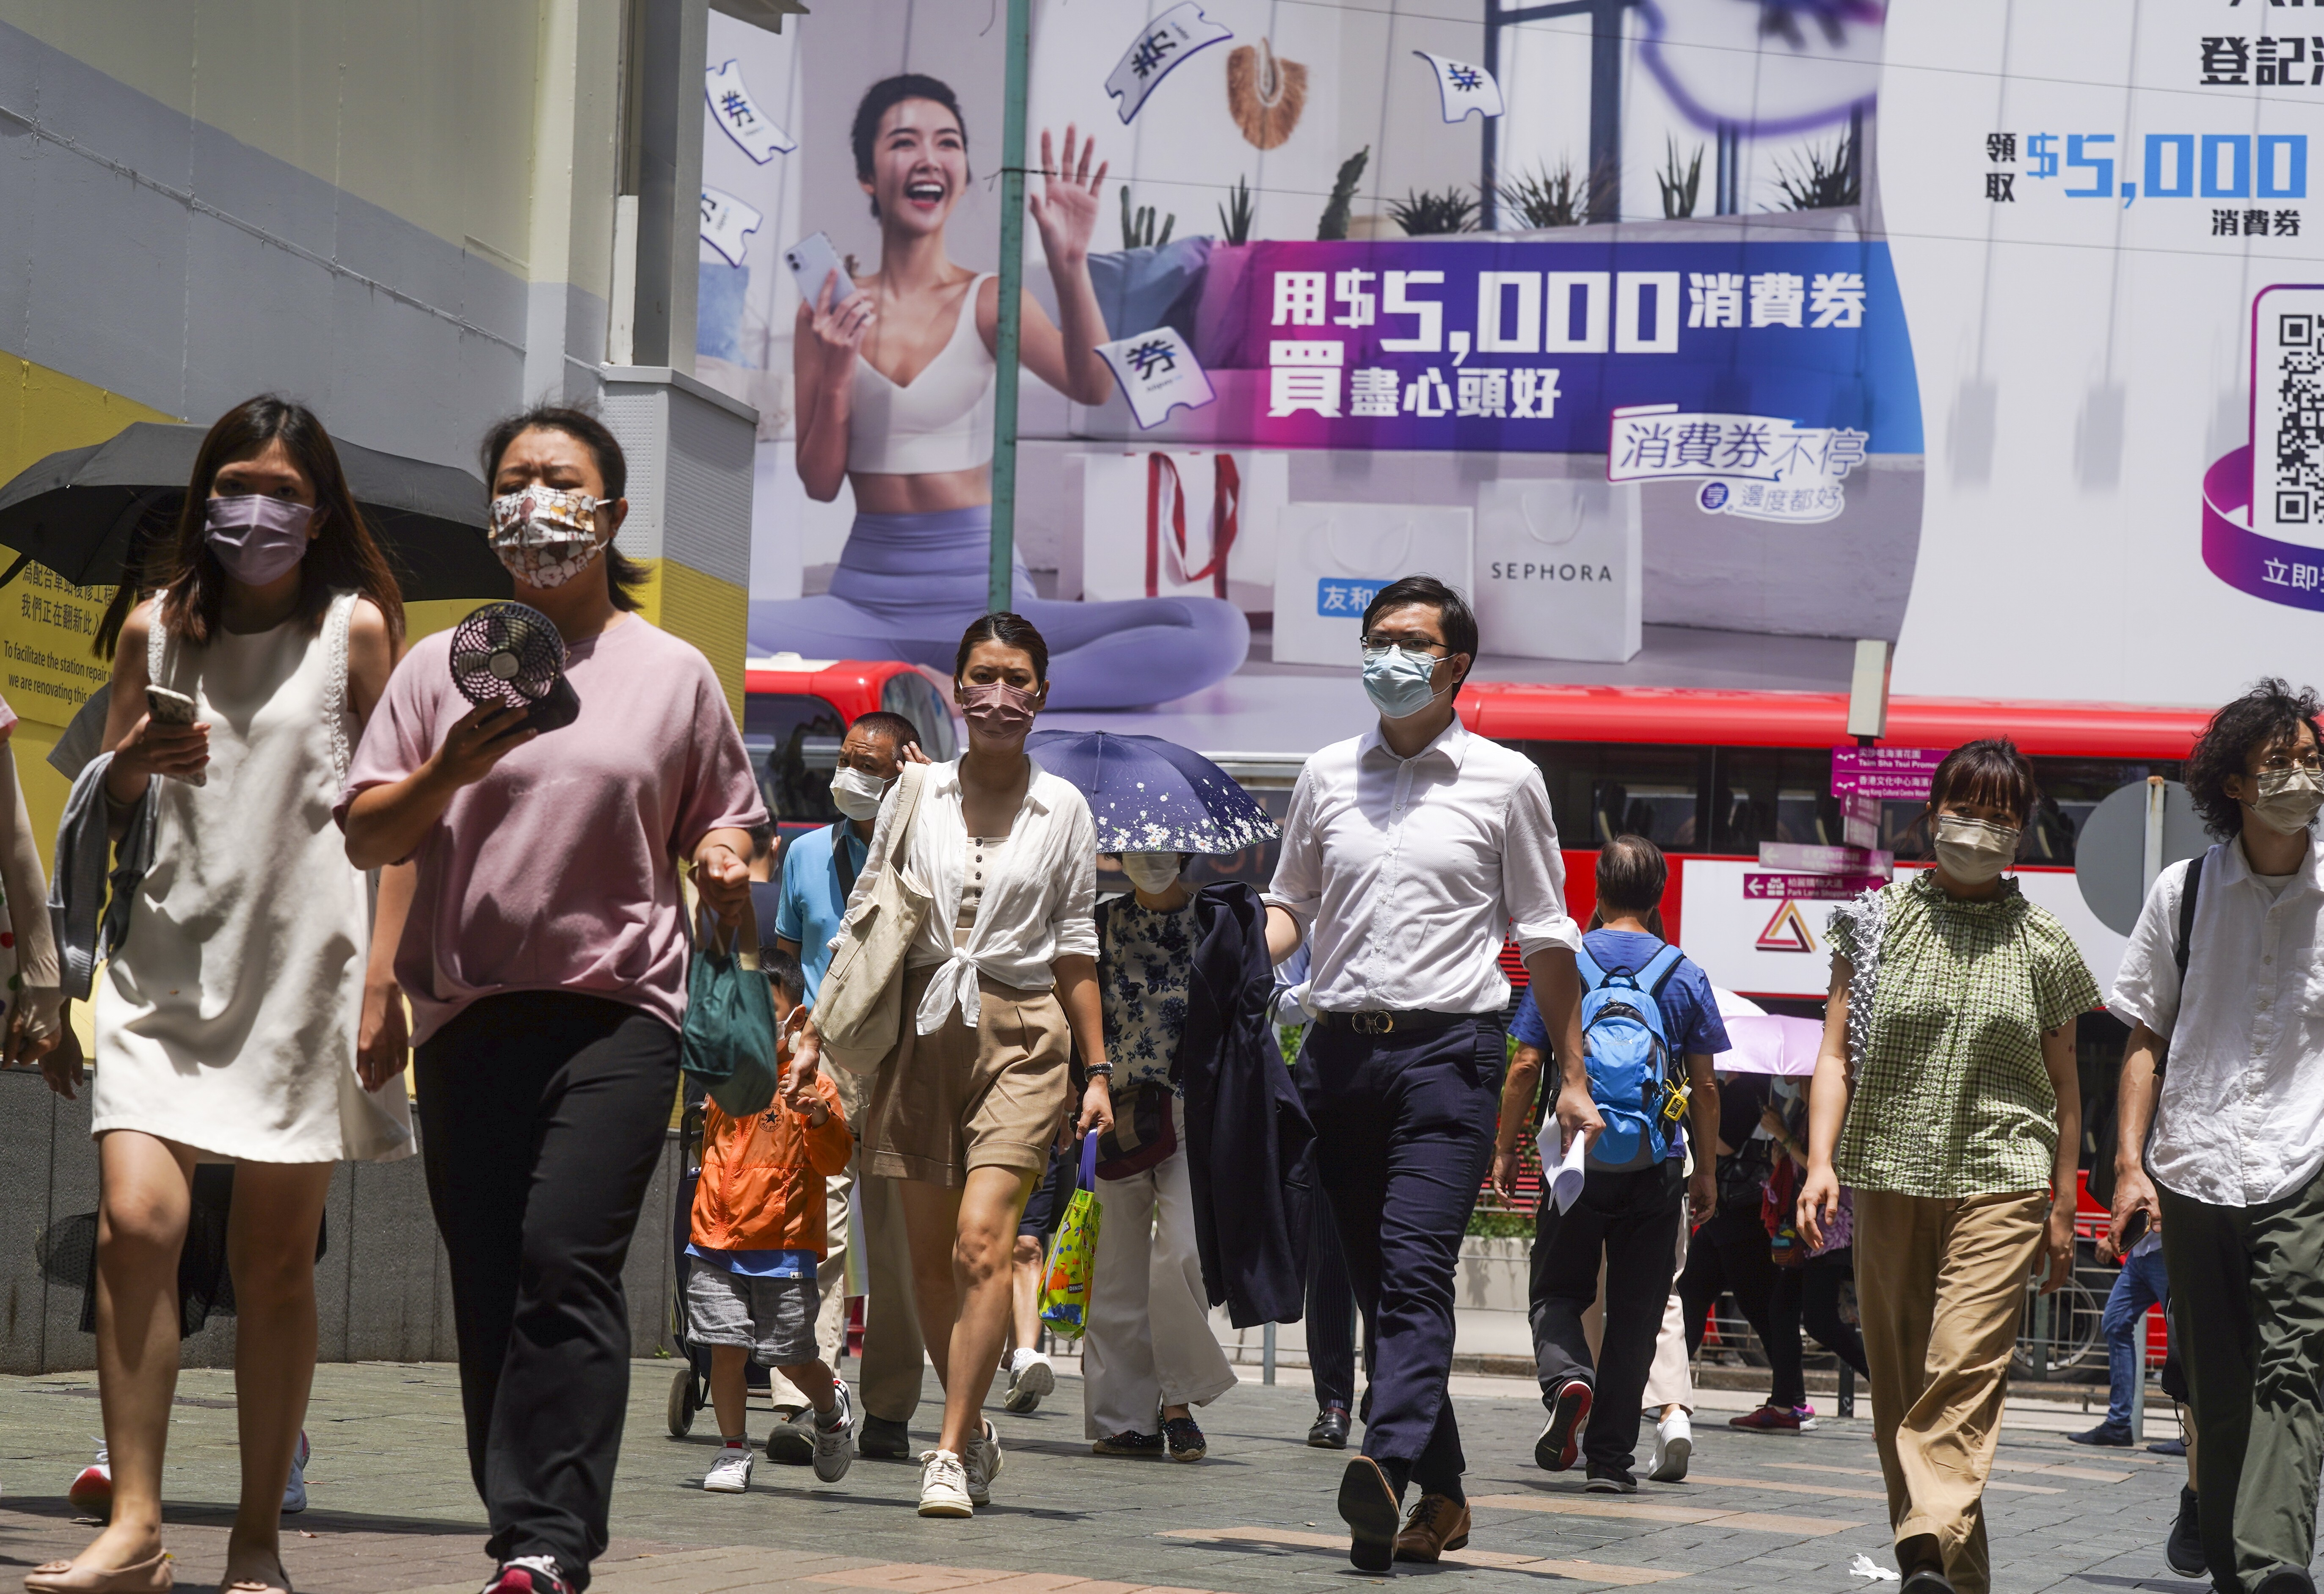 Residents go on a spending spree using their e-vouchers in the city’s various shopping belts such as Tsim Sha Tsui. Photo: Sam Tsang